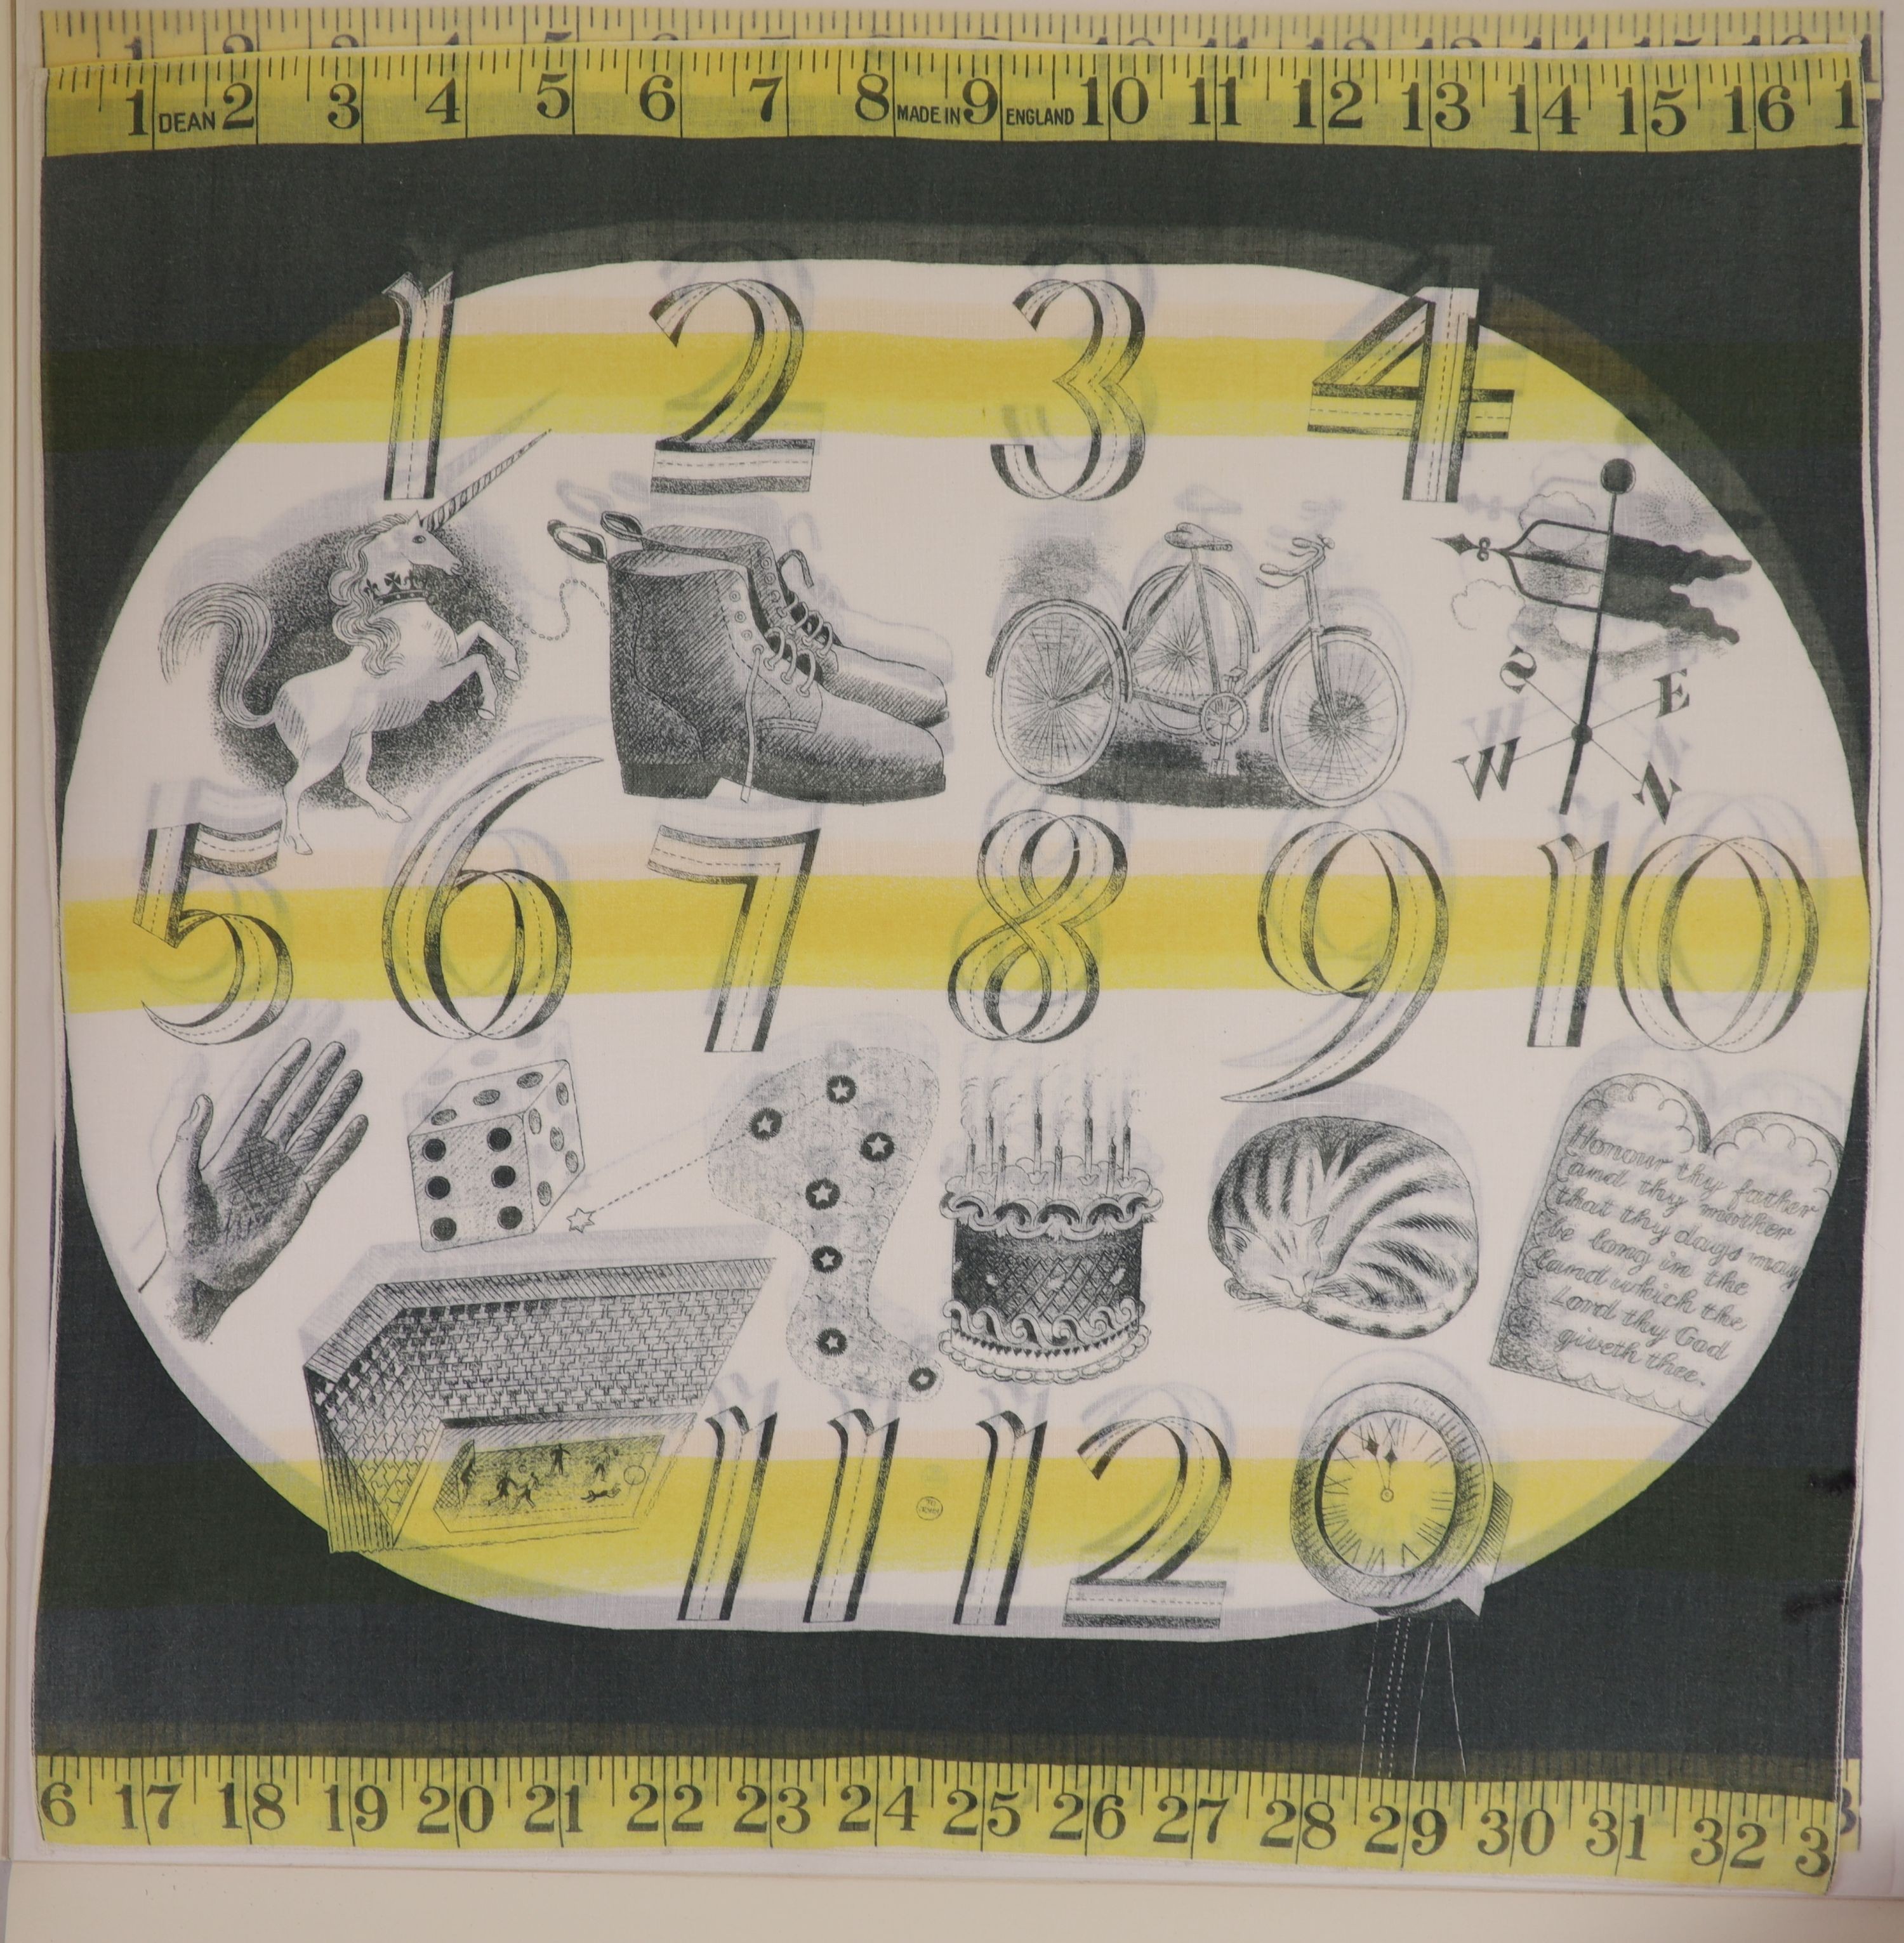 Eric Ravilious (1903-1942) - Child’s Handkerchief, Two lithographs, 1989, one printed on cotton, from an edition of 200, the other printed on Rivoli Blanc paper, numbered 33 of 500, 44cms. square, in presentation folio.